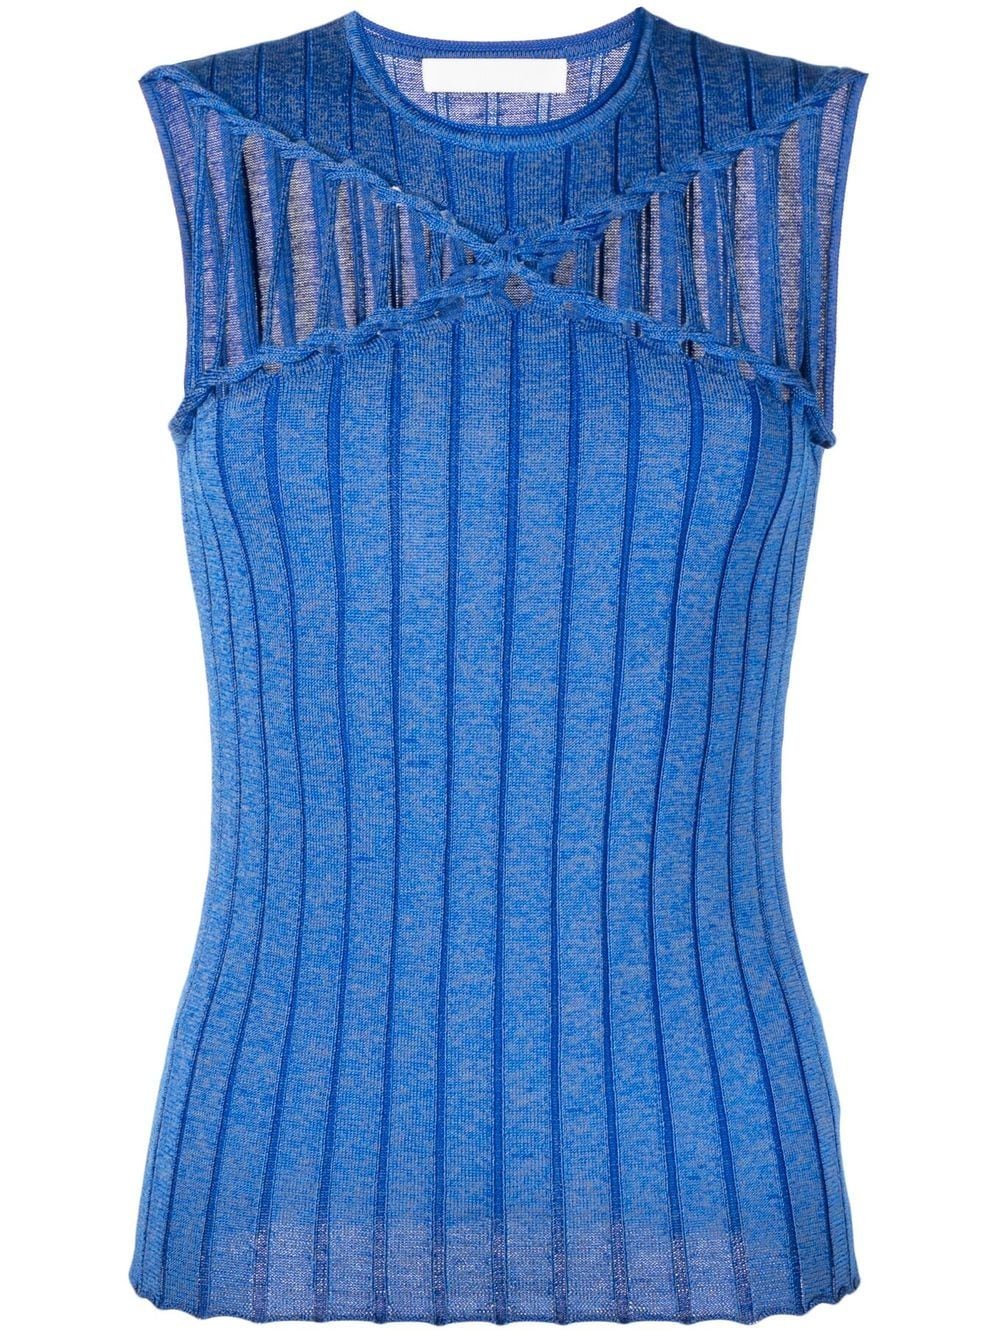 Dion Lee X Braid ribbed knitted top - Blue